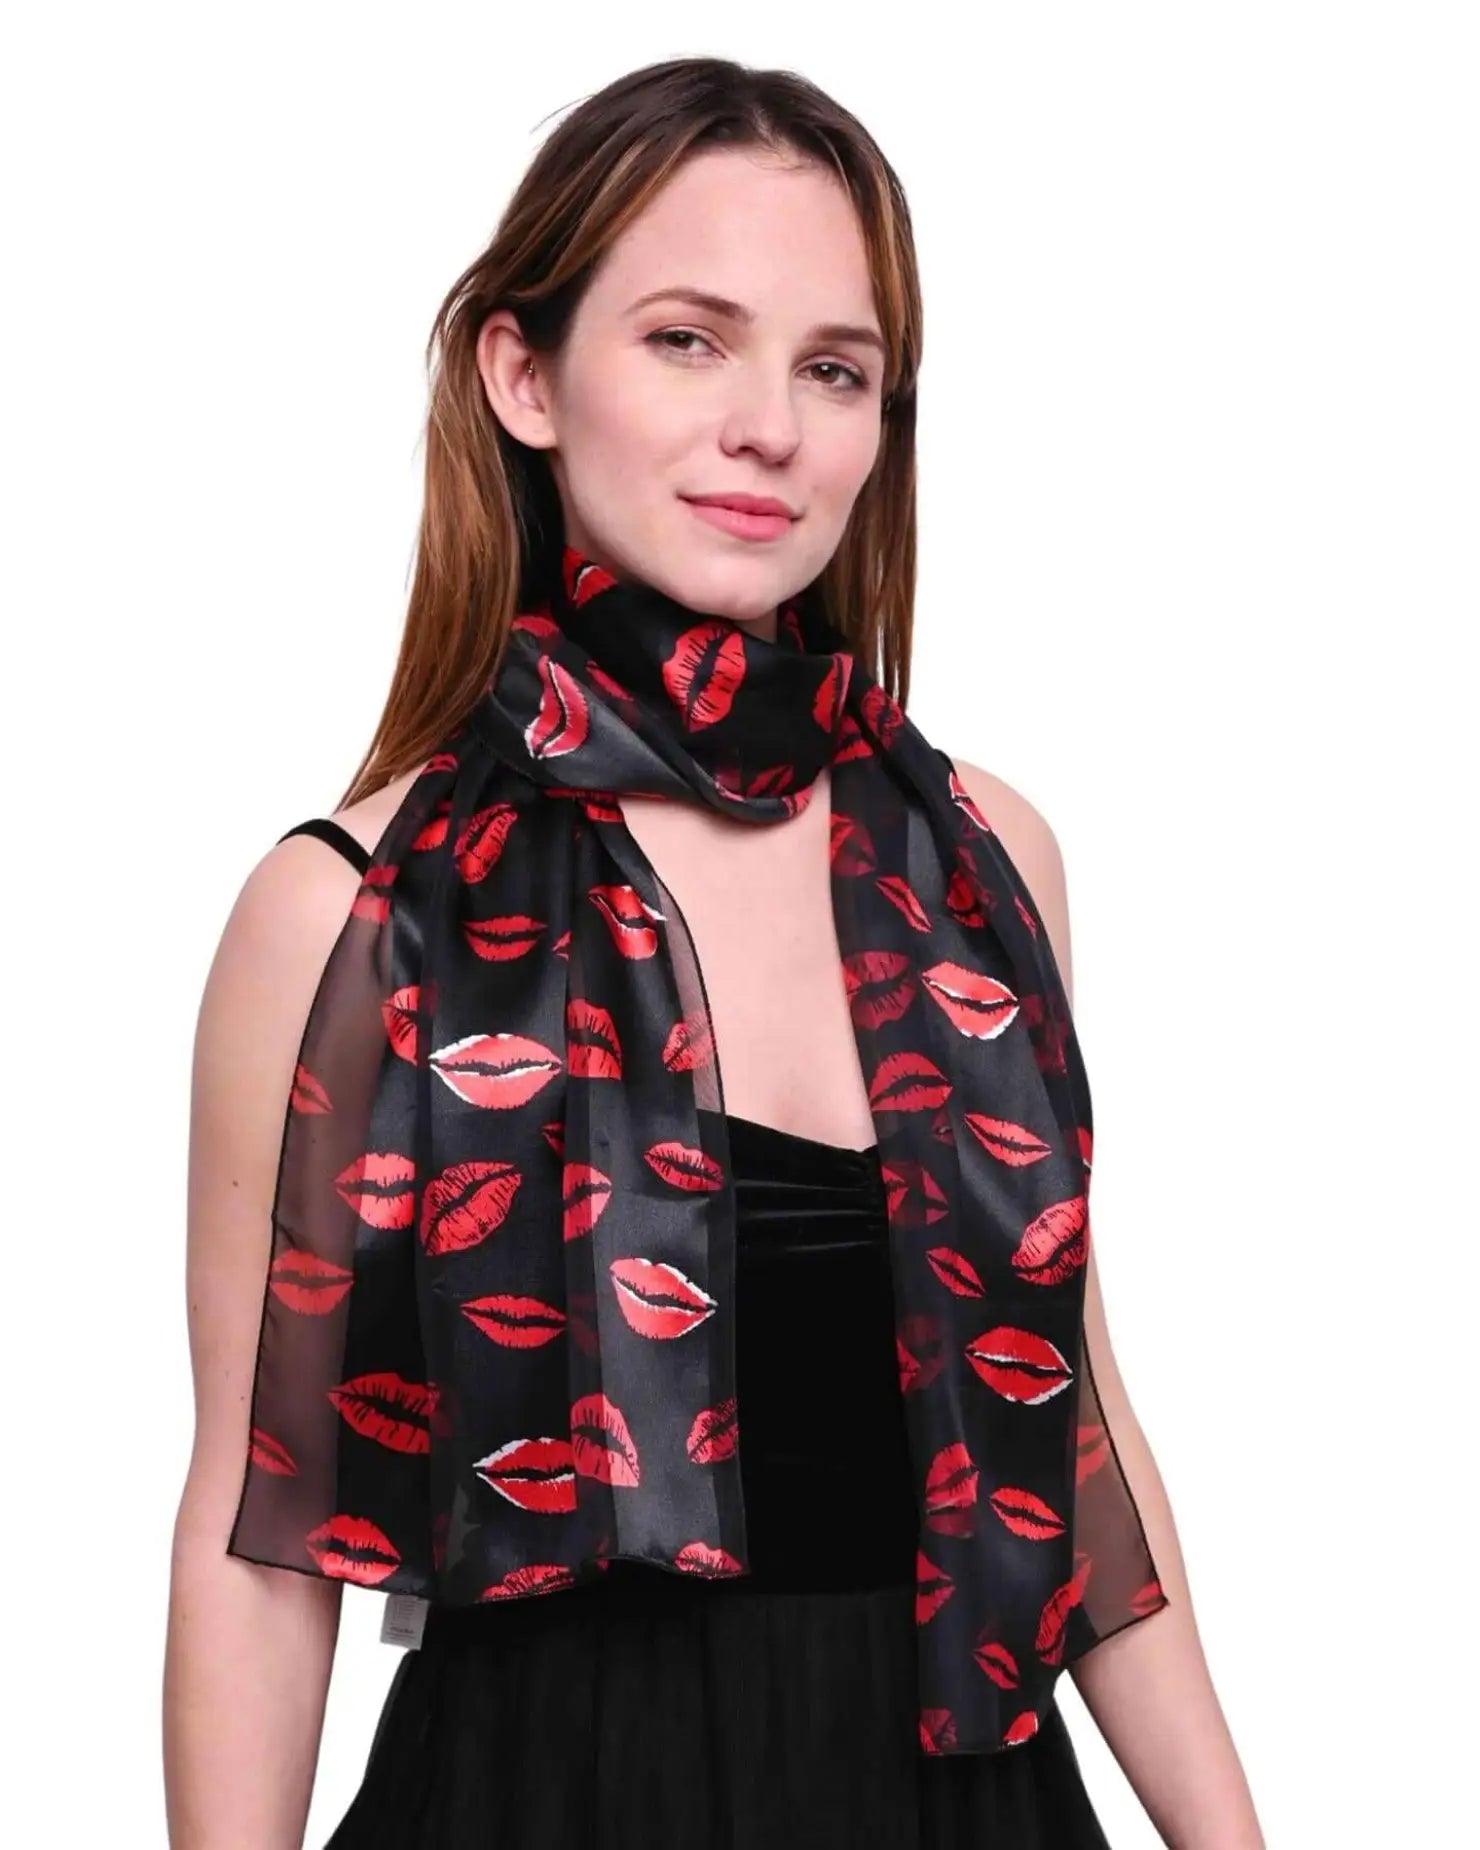 Woman wearing black and red scarf in Satin Lightweight Scarf with Kiss Mark Design.